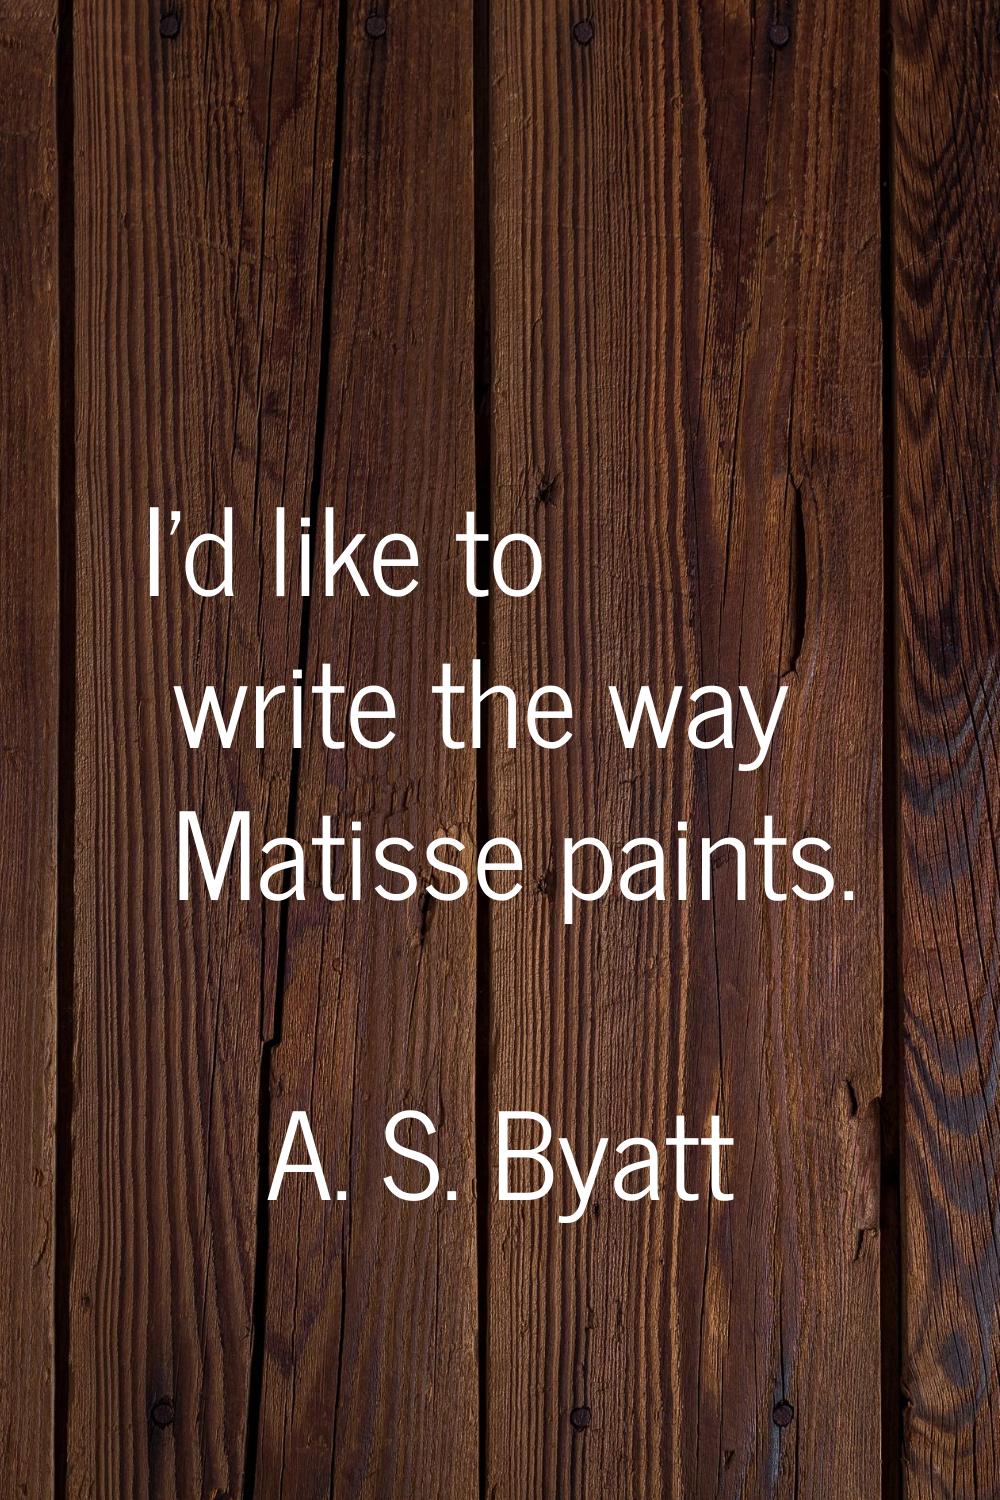 I'd like to write the way Matisse paints.